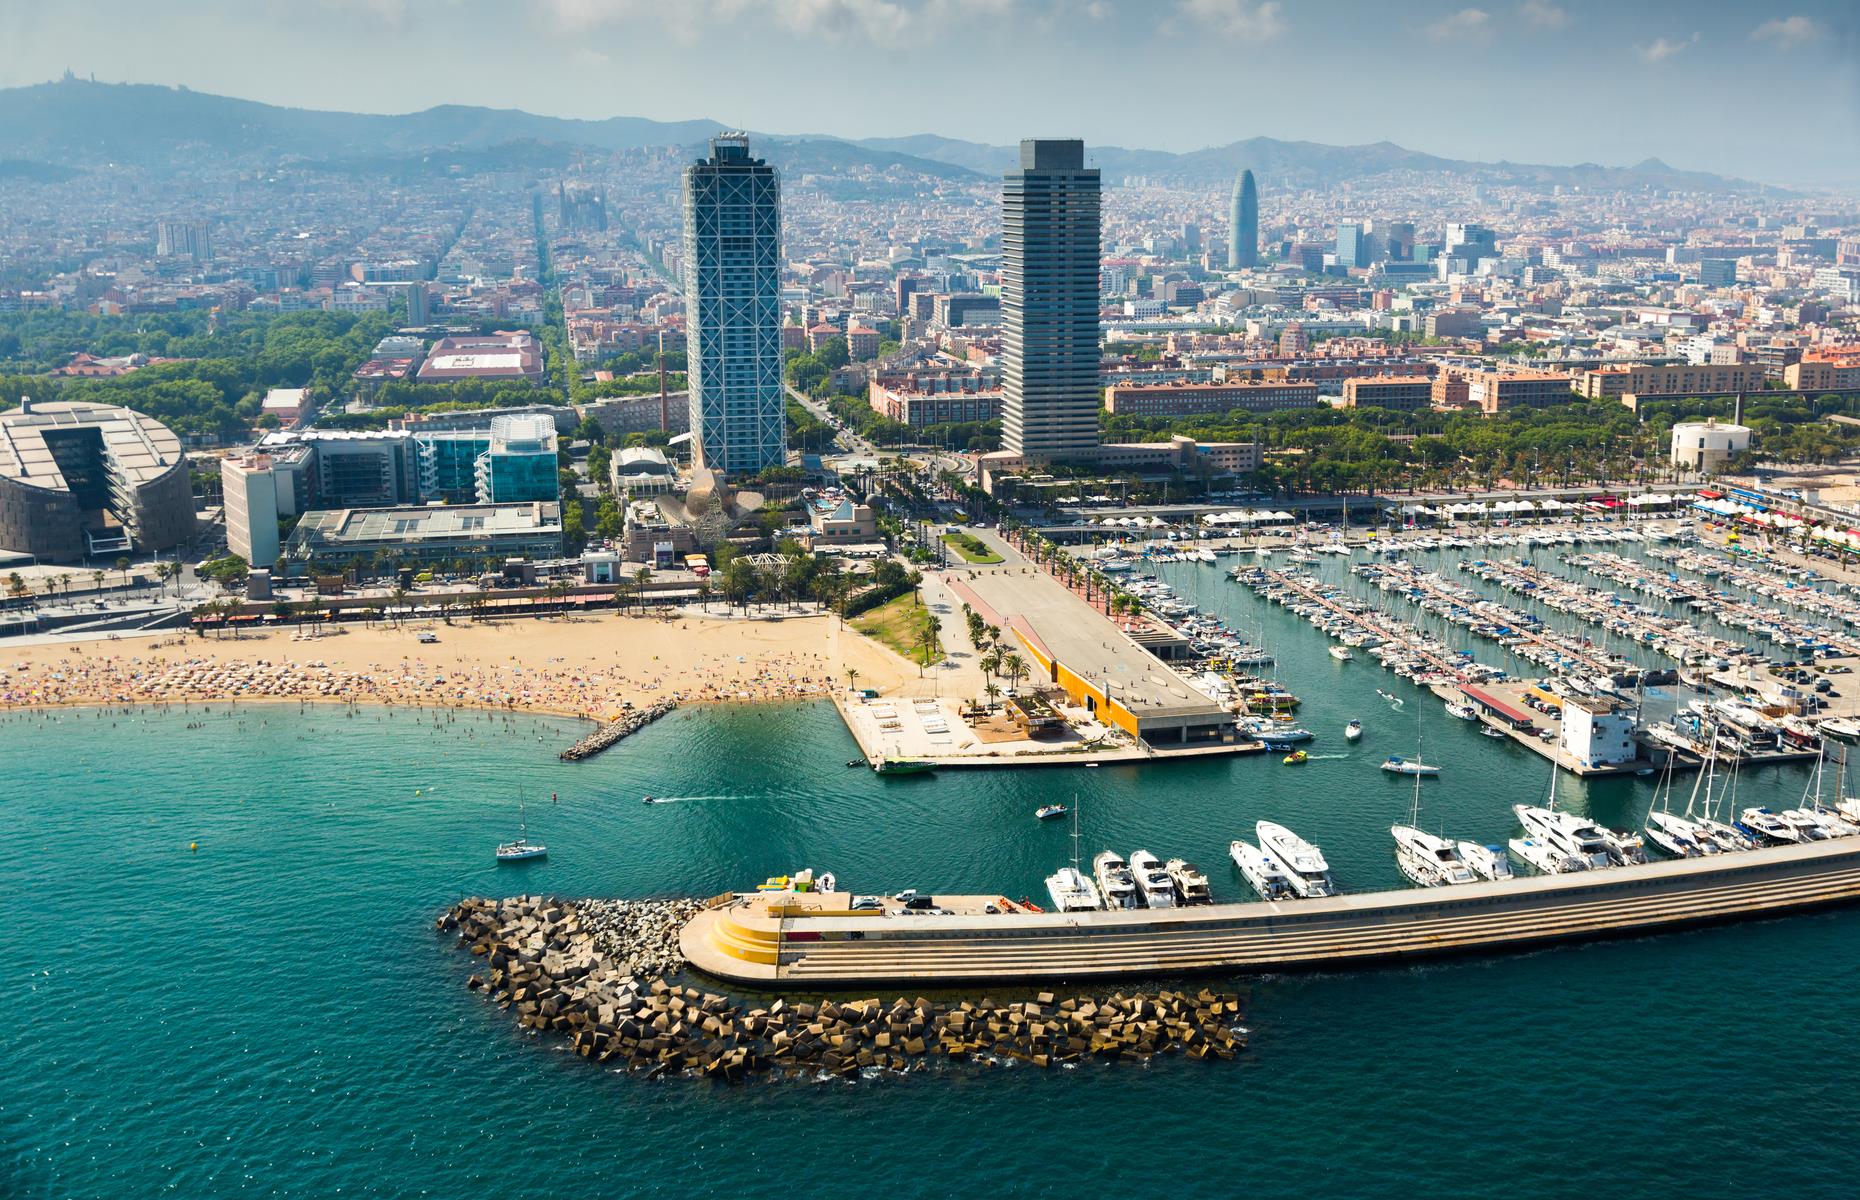 <p>Having been a trading hub for 2,000 years, the Port of Barcelona is also a major destination for cruises today. Captured from above in this spectacular aerial shot, the attractive port is within easy reach of the city centre and beach. Take a look at <a href="https://www.loveexploring.com/guides/79209/explore-barcelona-what-to-do-where-to-stay-and-where-to-eat">our guide to the Catalan city here</a>.</p>